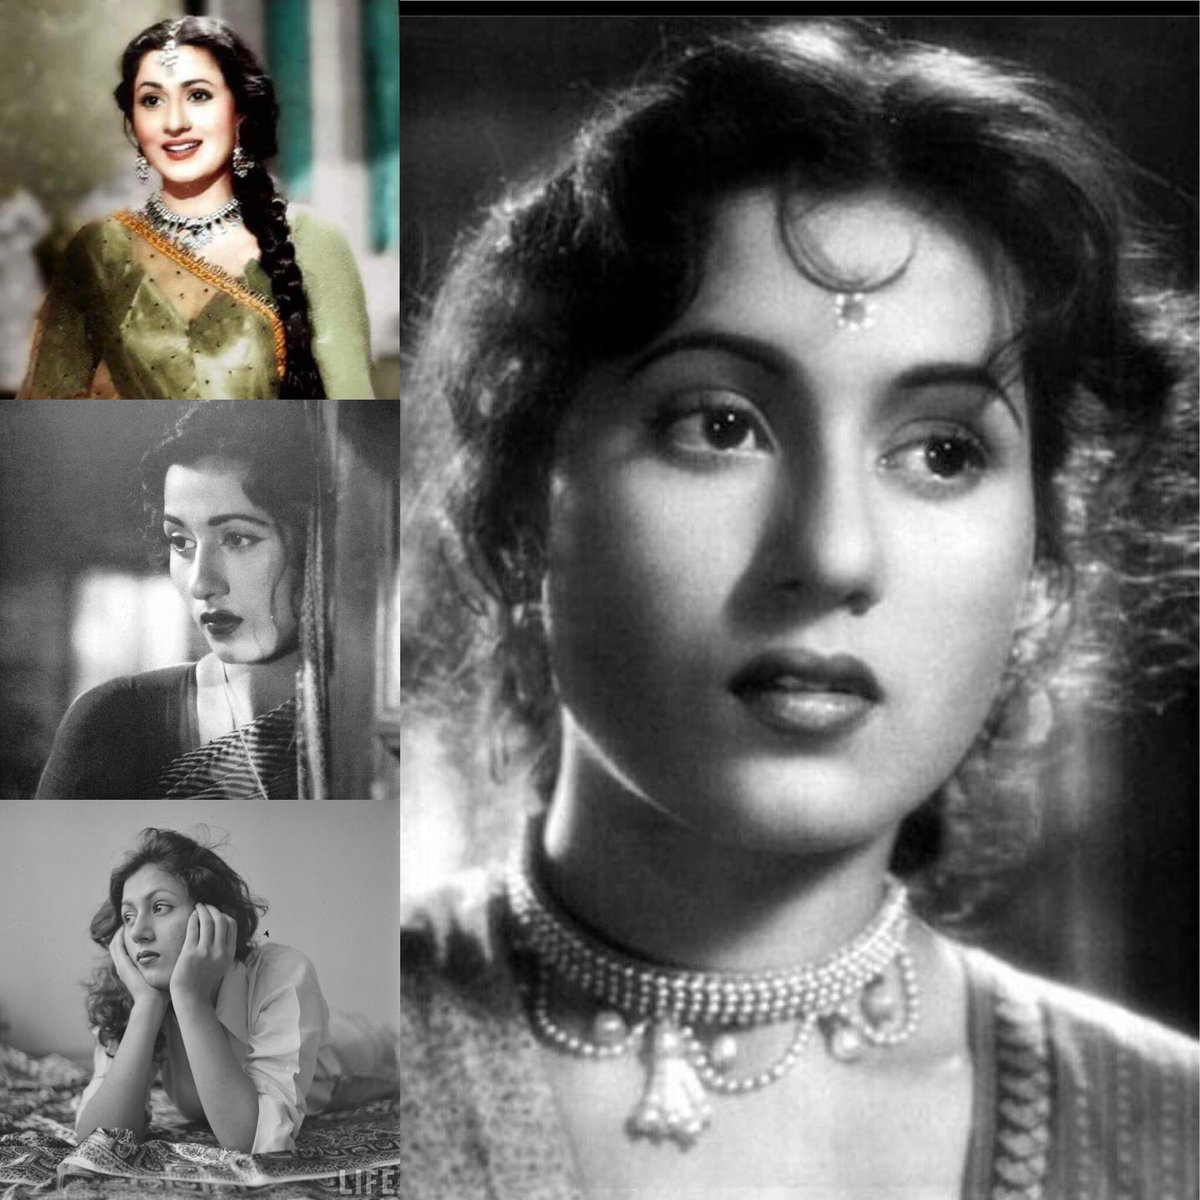 On Valentine’s Day Remembering gorgeous #Madhubala ji on her 86th Birth Anniversary the most beautiful woman who rule the screen forever 
Her unforgettable portrayal of #Anarkali in #MughalEAzam gave Madhubala the iconic status.

#Madhubala ji still miss your charm on screen ♥️